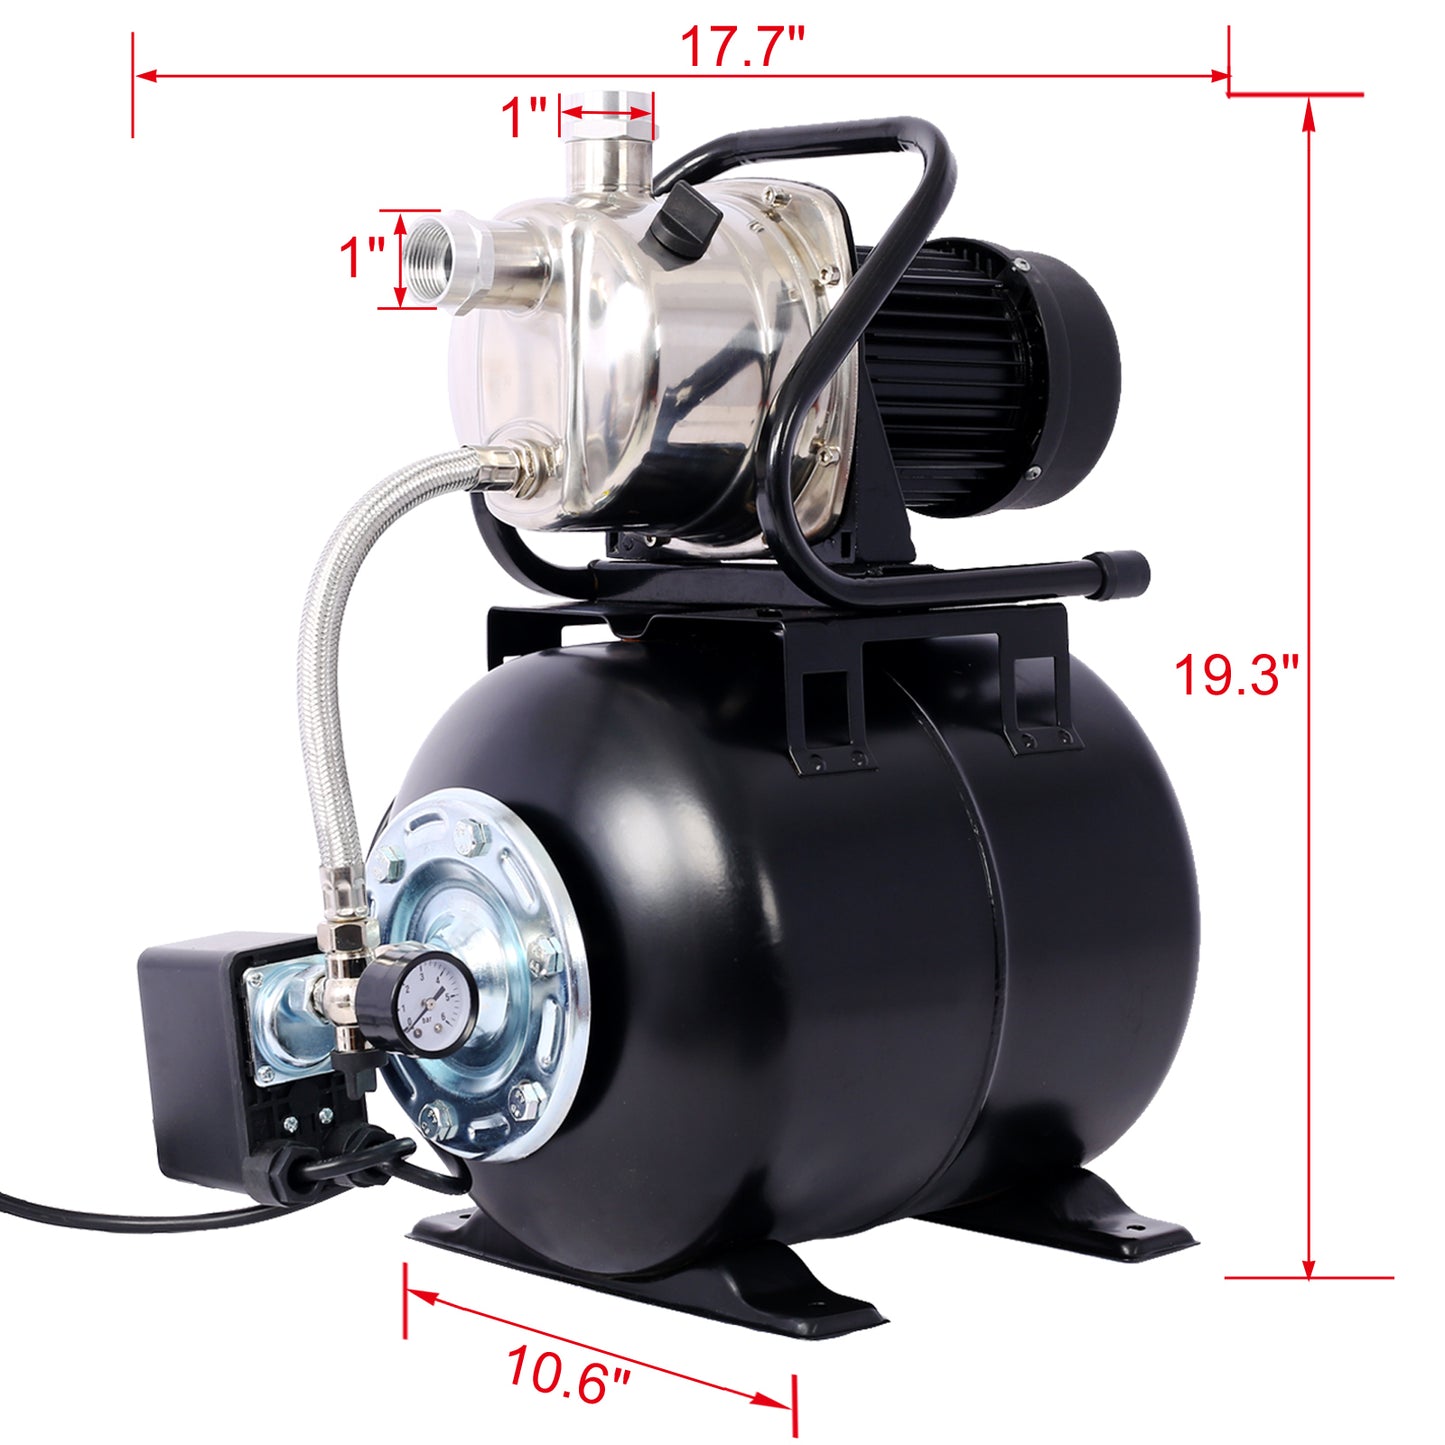 1.6HP Shallow Well Pump with Pressure Tank,garden water pump, Irrigation Pump,Automatic Water Booster Pump for Home Garden Lawn Farm，stainless steel head